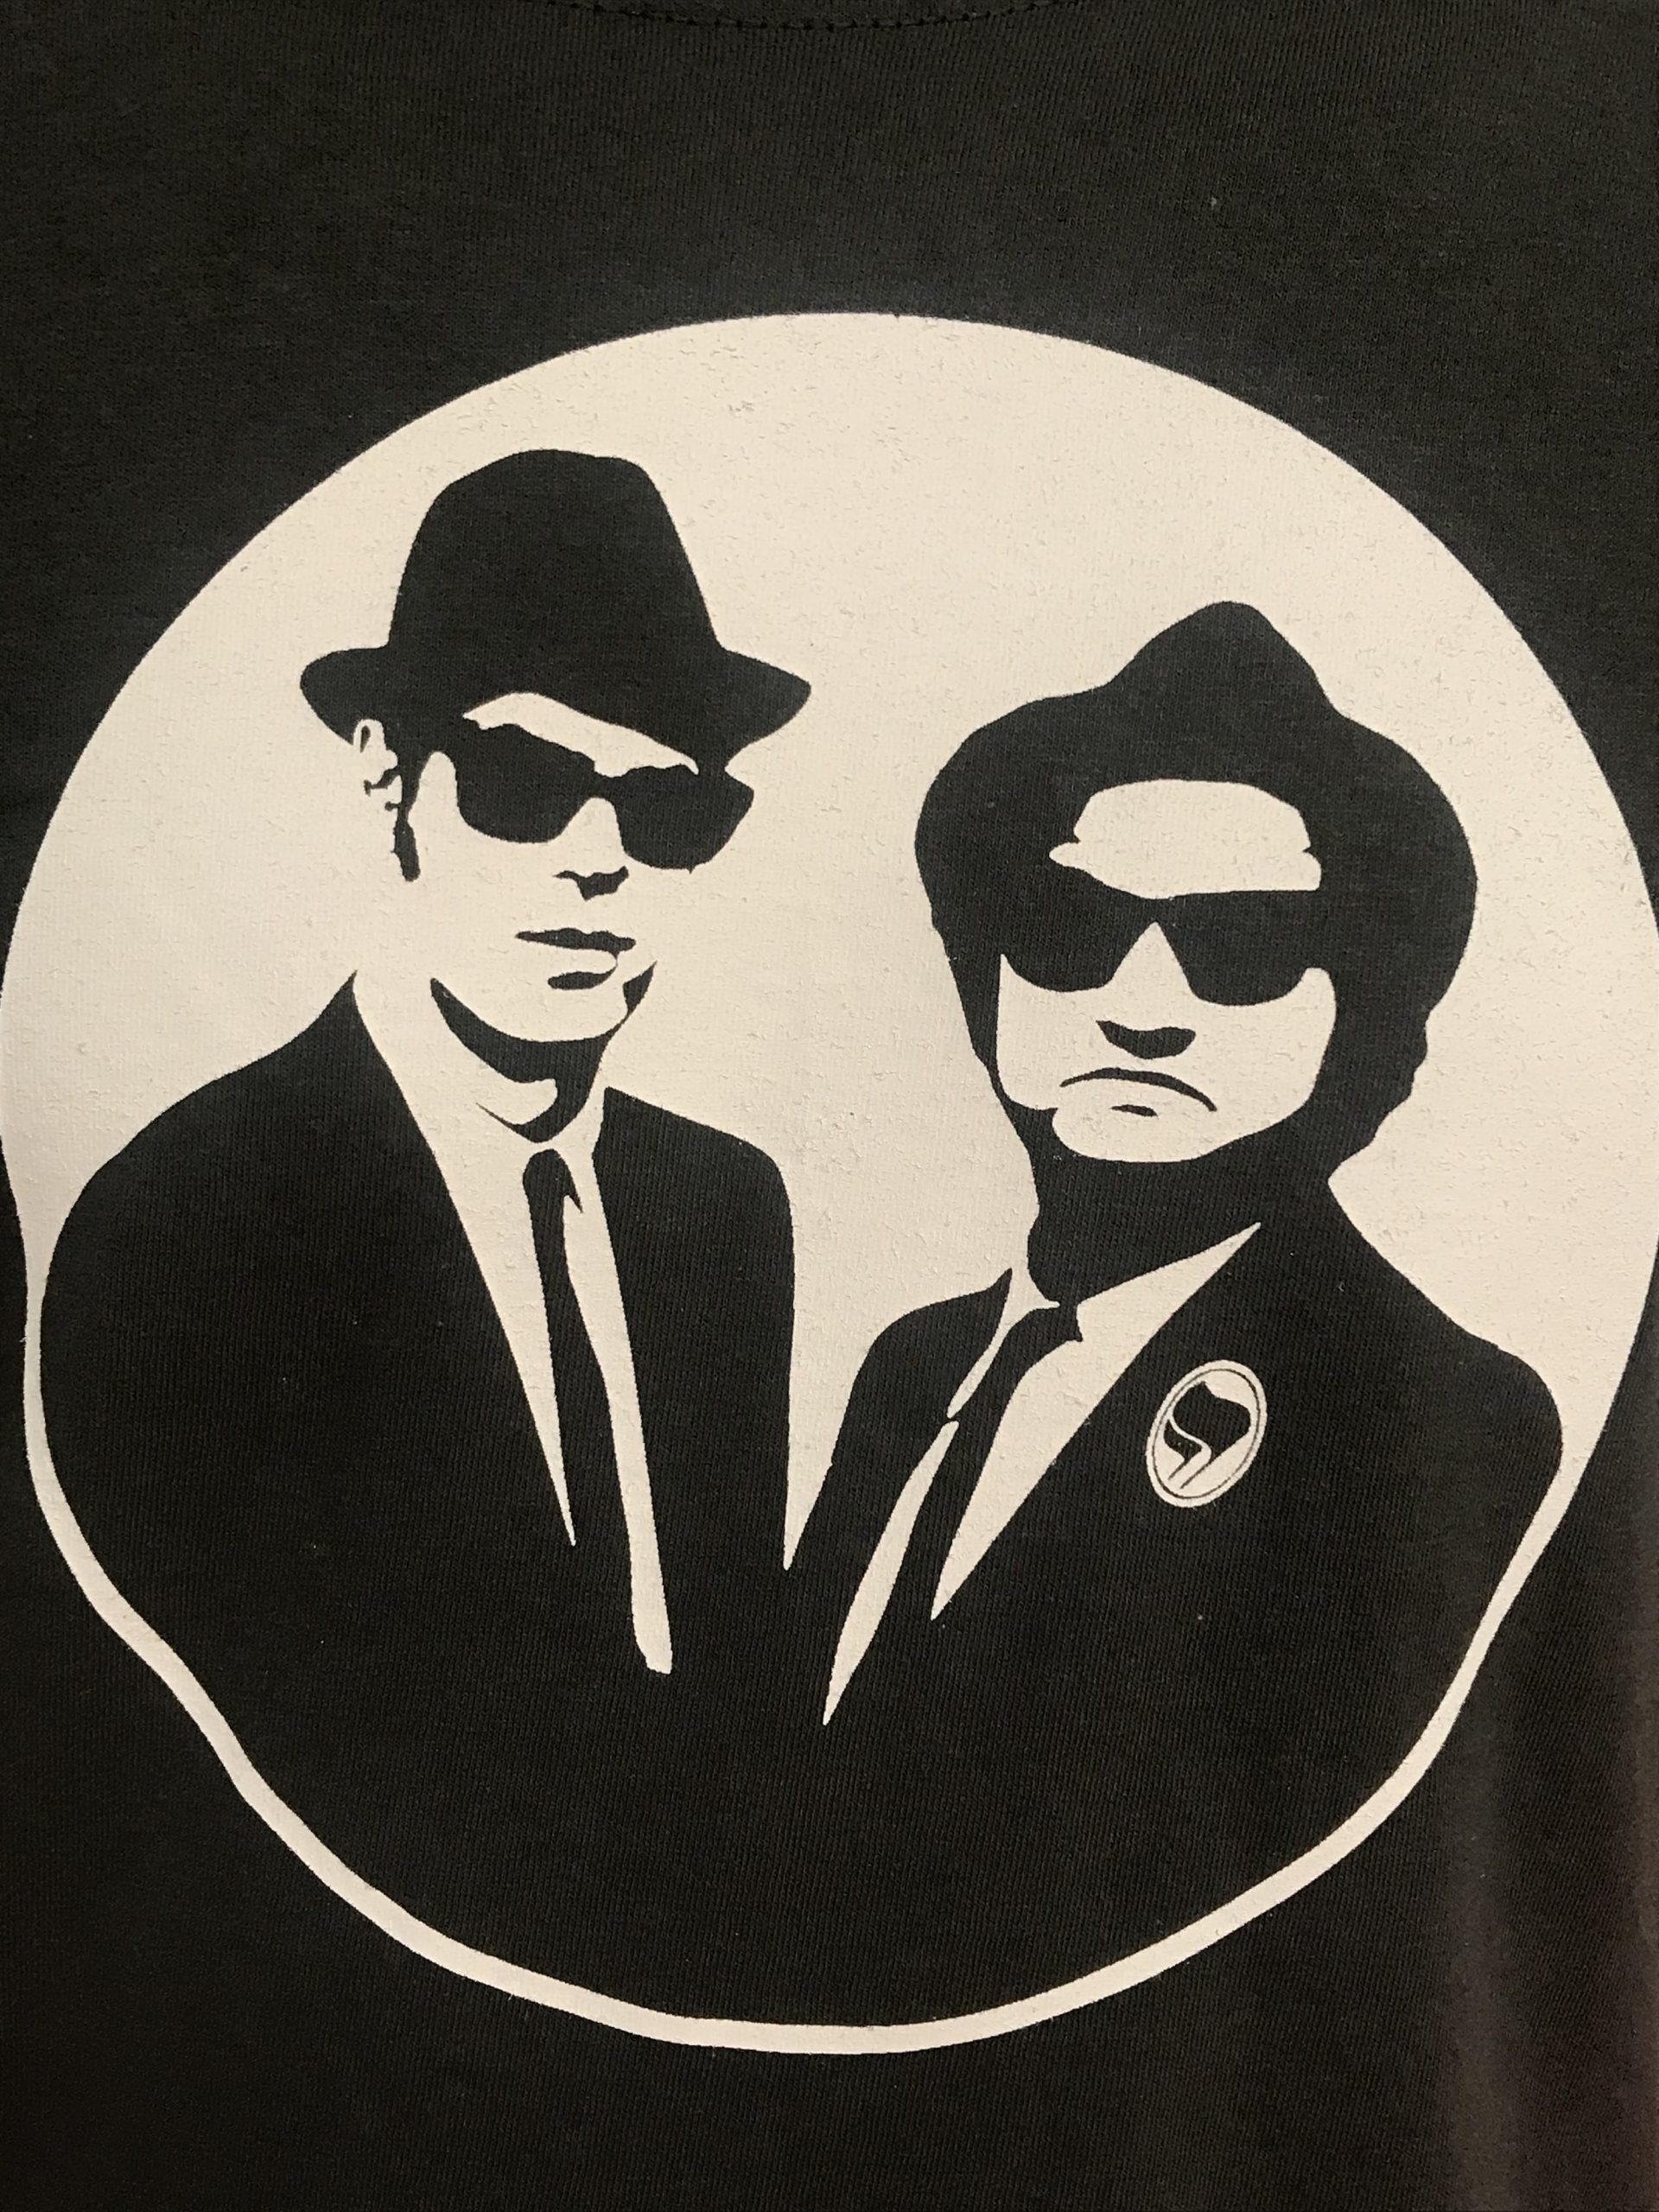 TheBluesBrothers